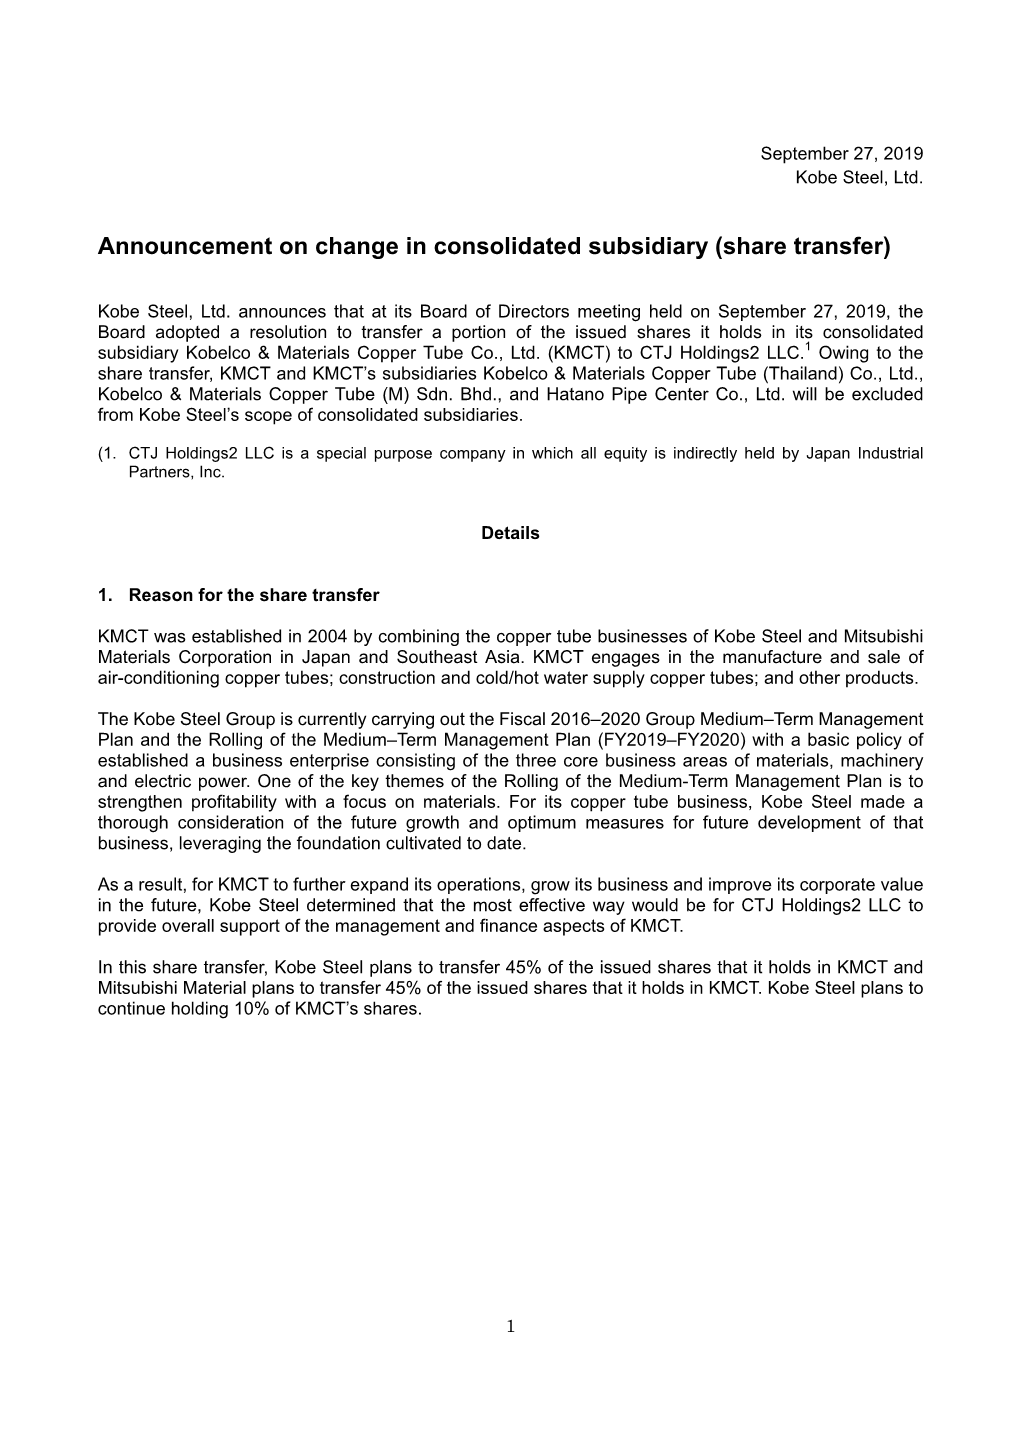 Announcement on Change in Consolidated Subsidiary (Share Transfer)